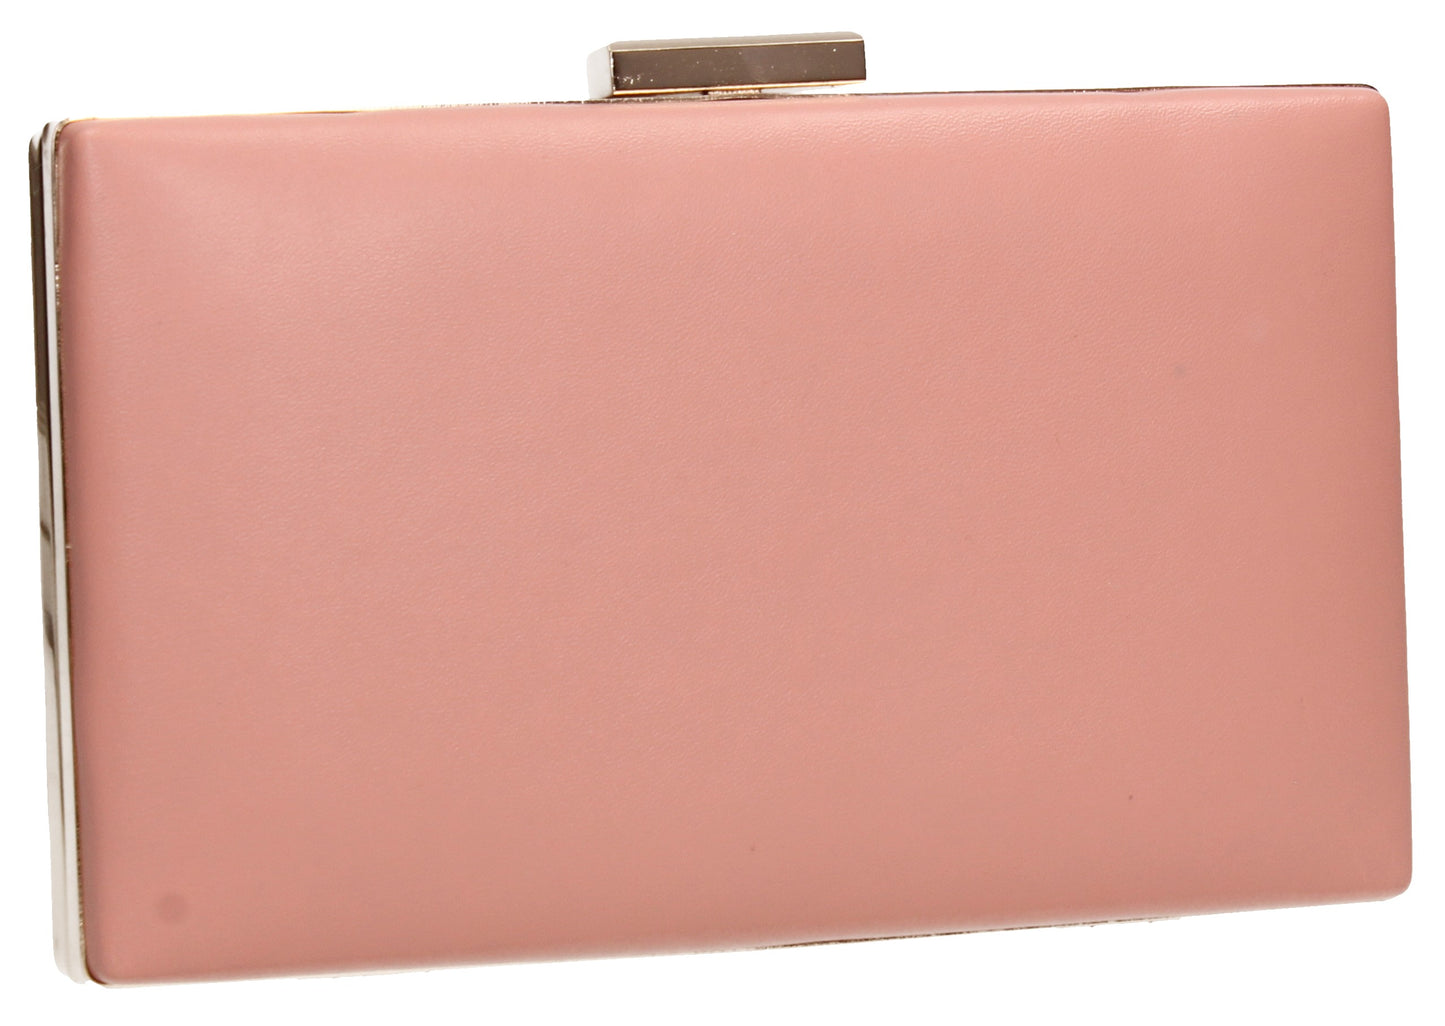 SWANKYSWANS Valery Floral Detail Clutch Bag Pink Cute Cheap Clutch Bag For Weddings School and Work